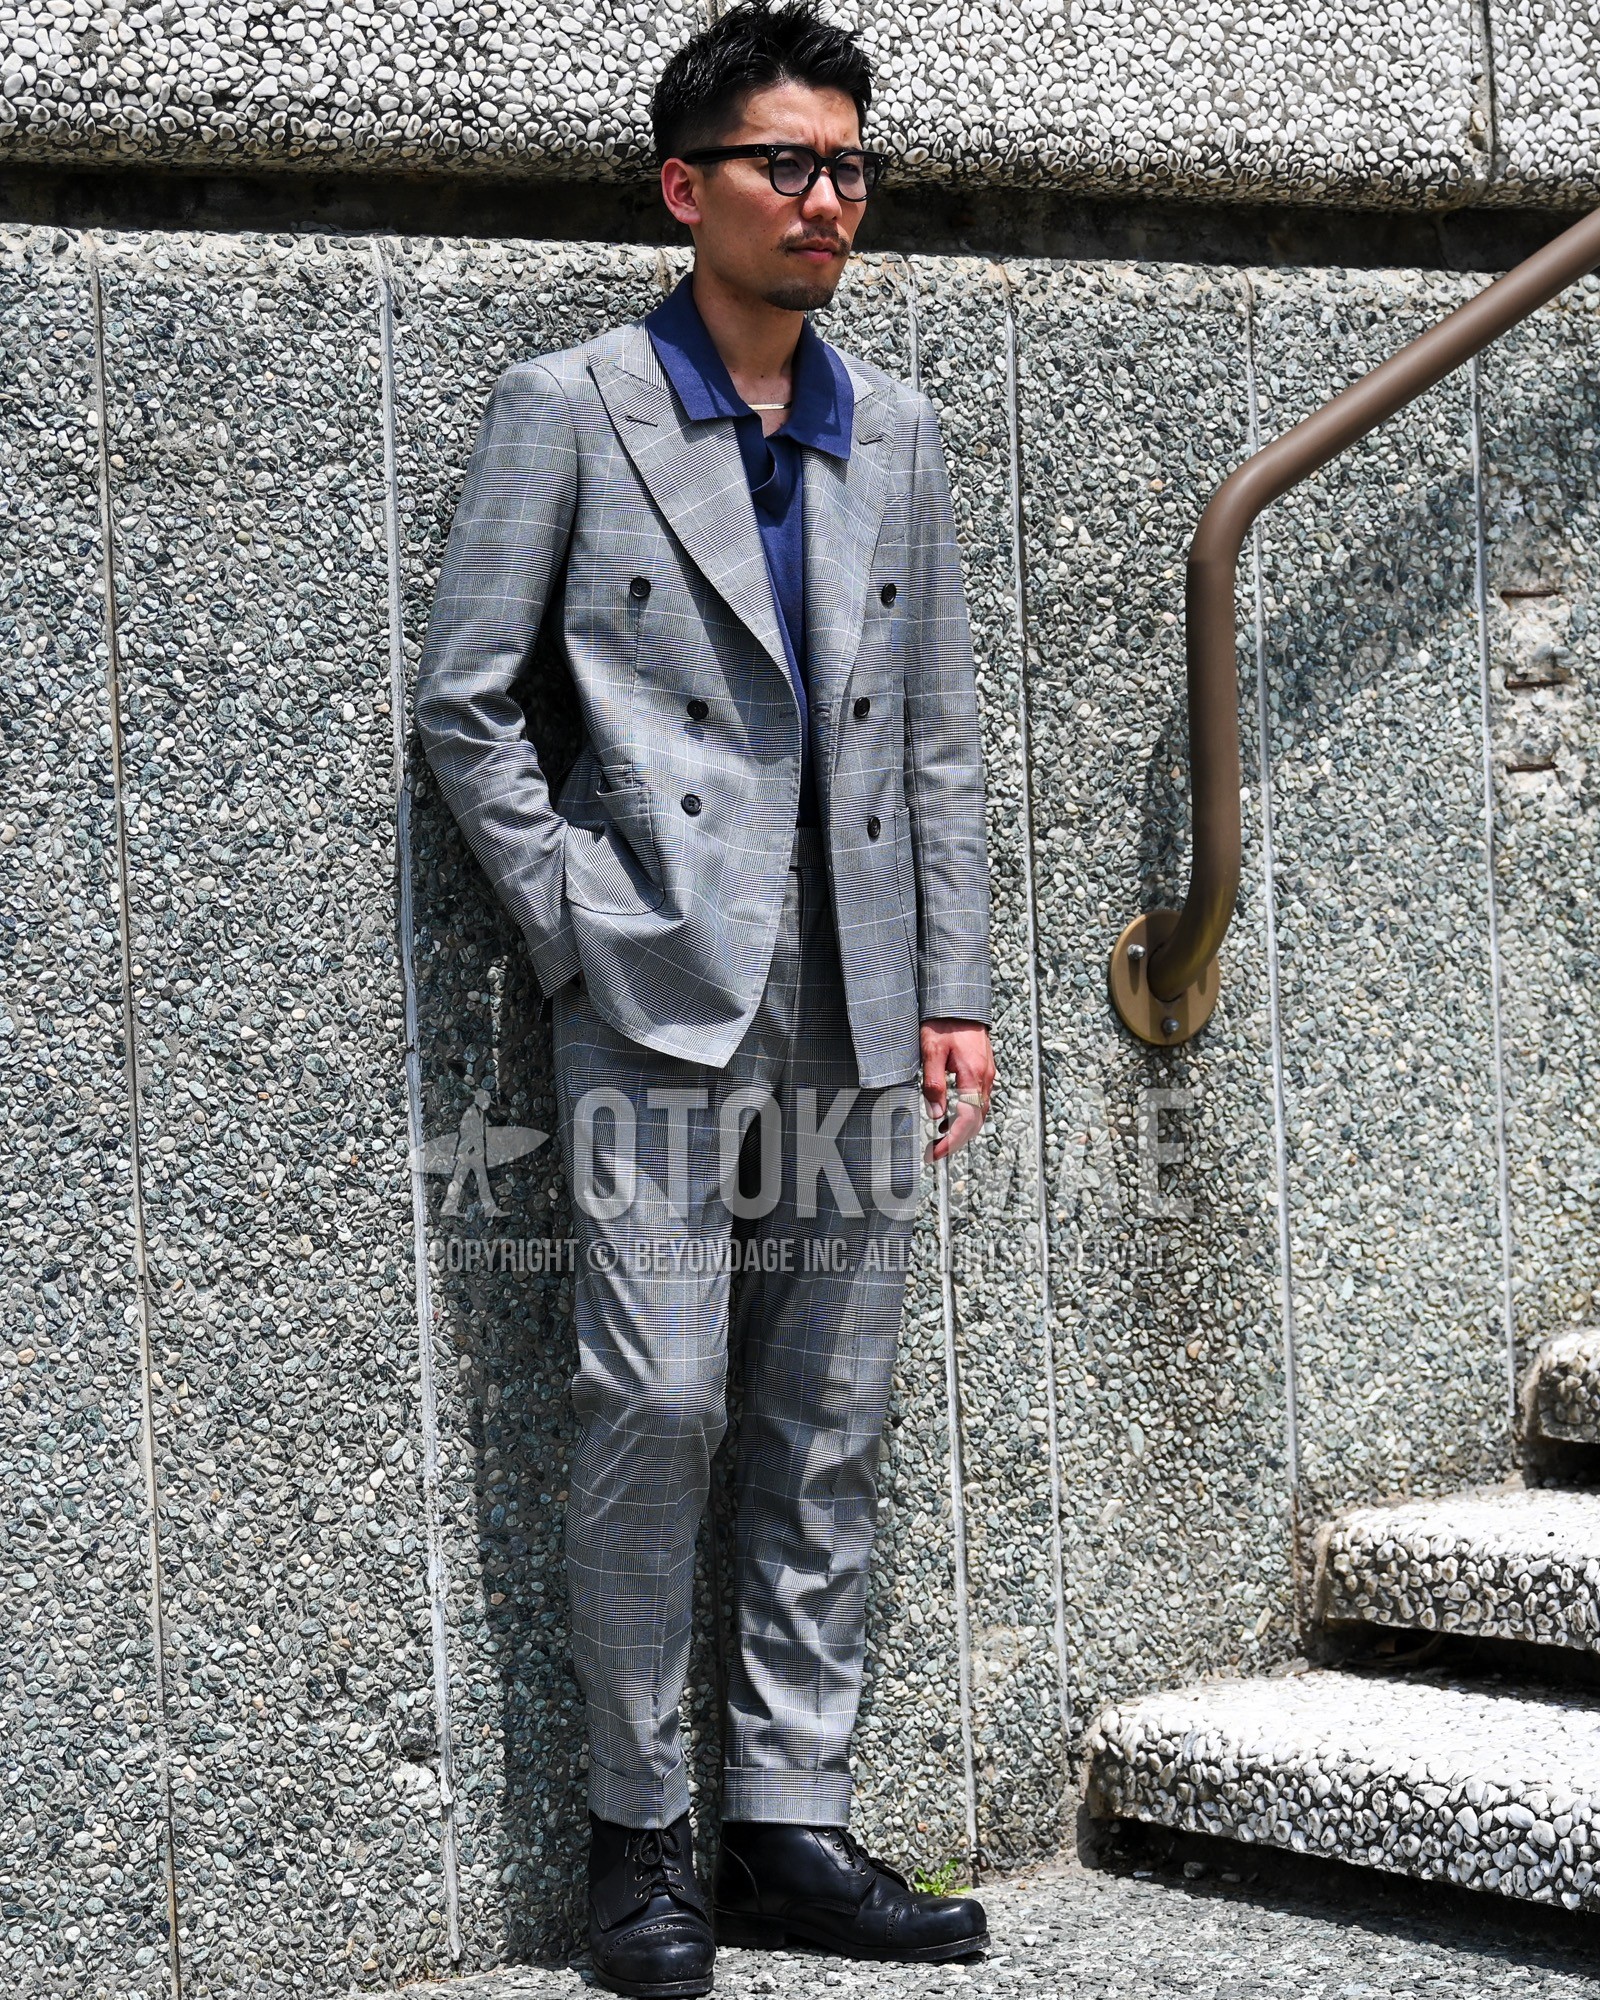 Men's spring summer autumn outfit with clear plain sunglasses, navy plain shirt, black  boots, gray check suit.